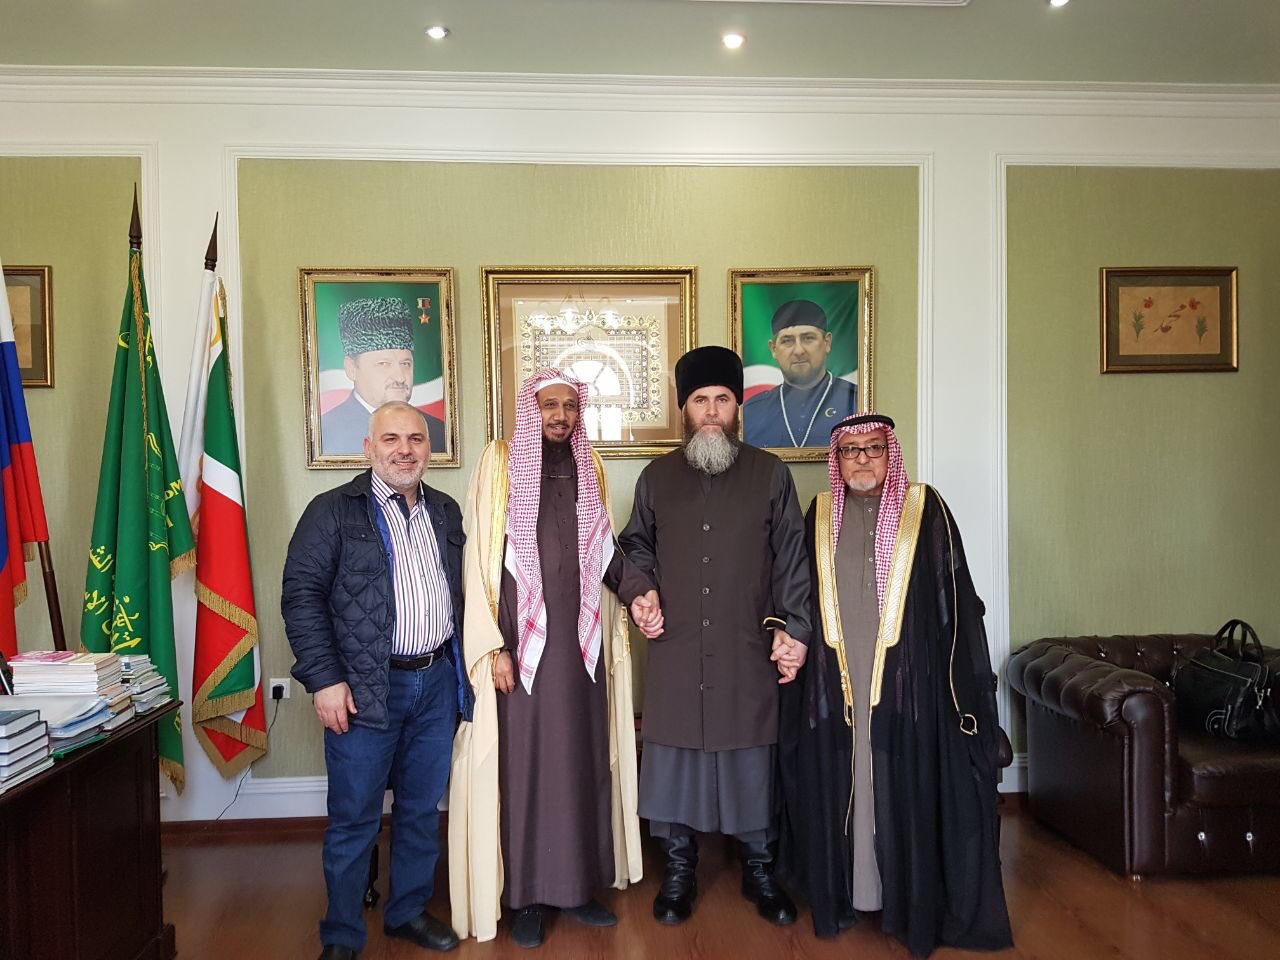 H.E. the Grand Mufti of the Republic of Chechnya, Sheikh Salakh Mezhiev, receives the Secretary-General of the Holy Quran Memorization Int’l Org. Dr. Abdullah Basfar, and the Director-General of the Dept. of Conferences at the MWL Mr. Rahmatullah Enayatul